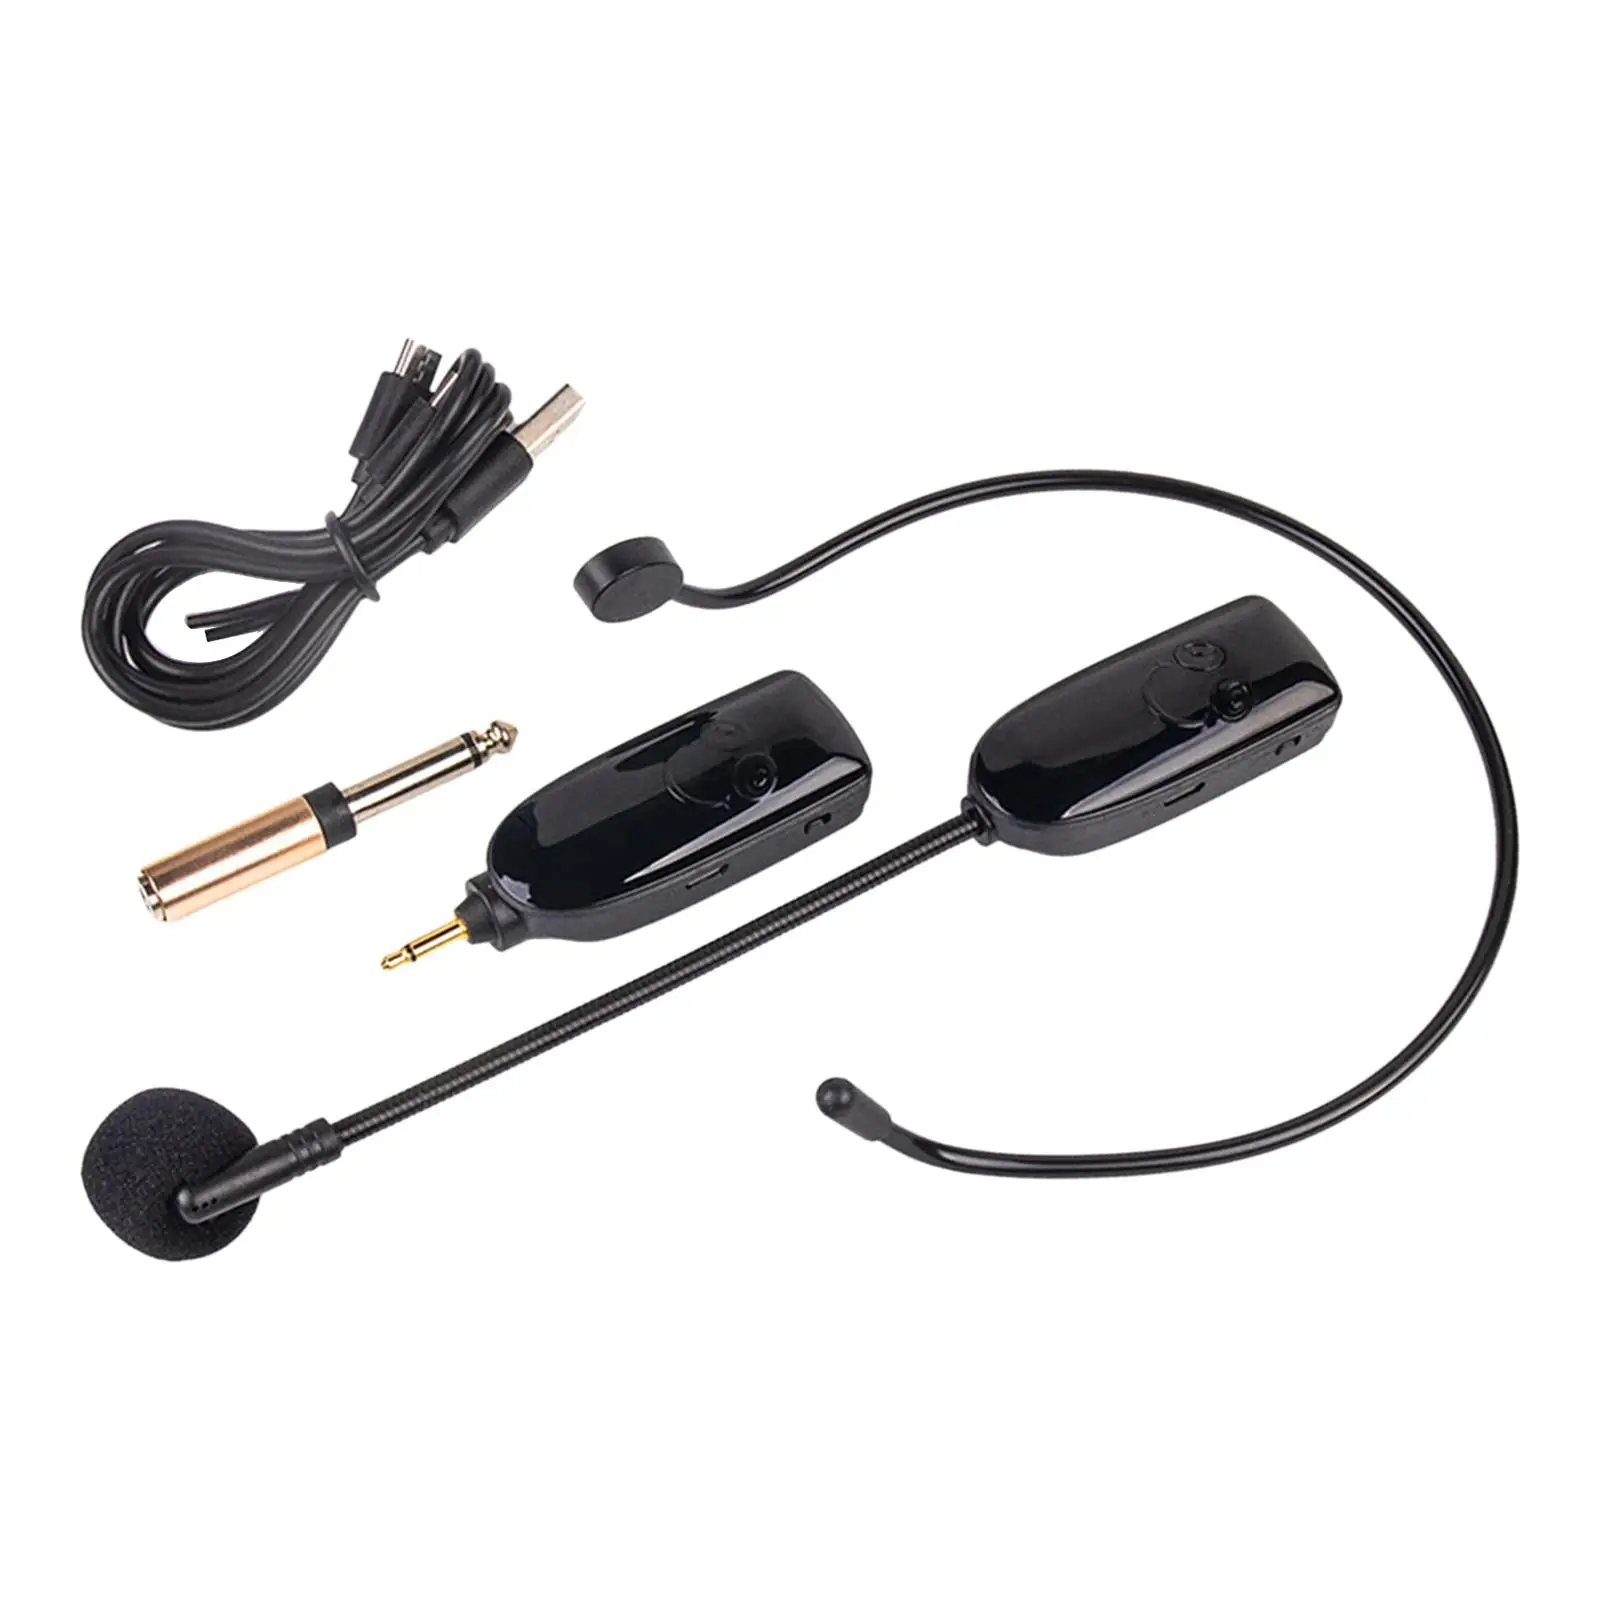 Headset Microphone 20M Range Headset Mic for Teacher Teaching Voice Amplifier Stage Speakers